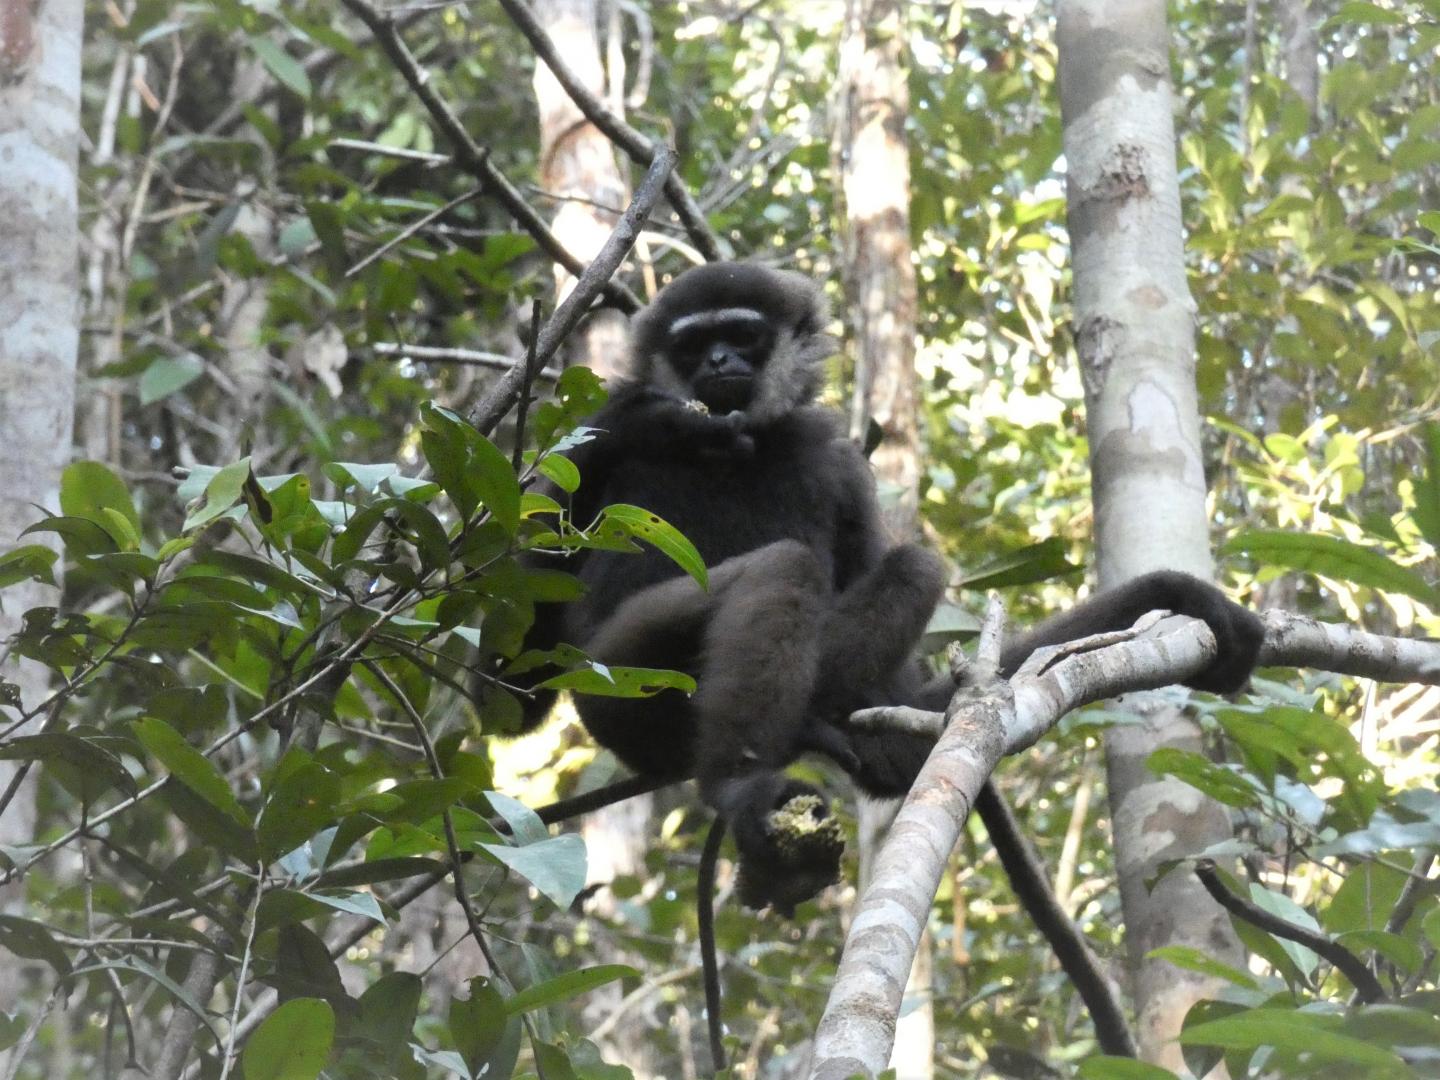 Gibbons' Large, Long-Term Territories Put Them under Threat from Habitat Loss